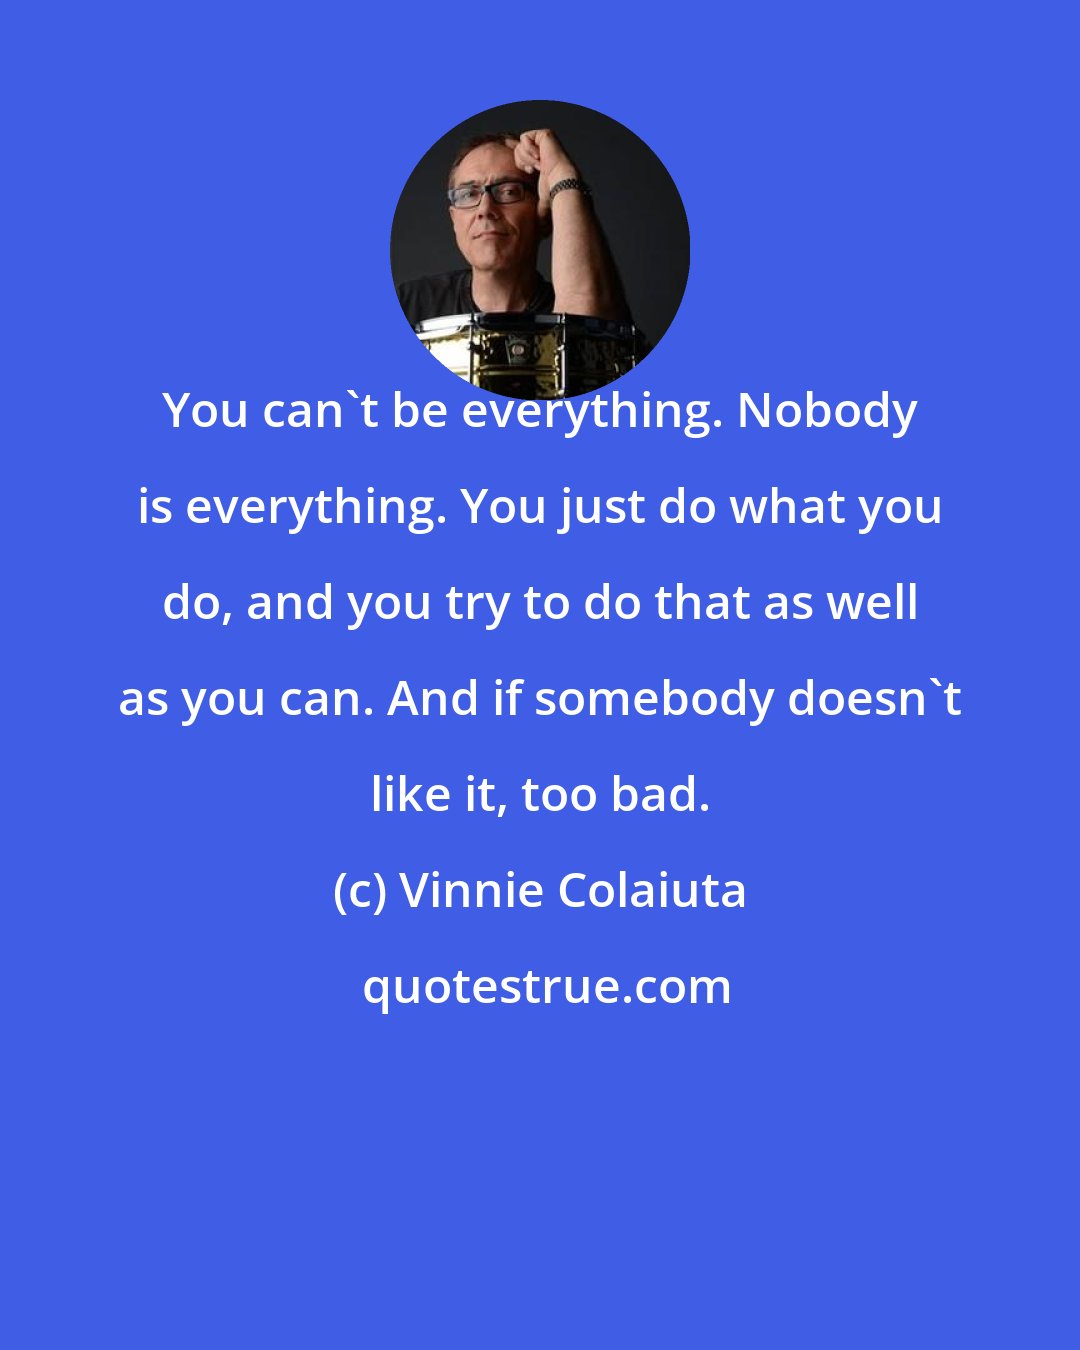 Vinnie Colaiuta: You can't be everything. Nobody is everything. You just do what you do, and you try to do that as well as you can. And if somebody doesn't like it, too bad.